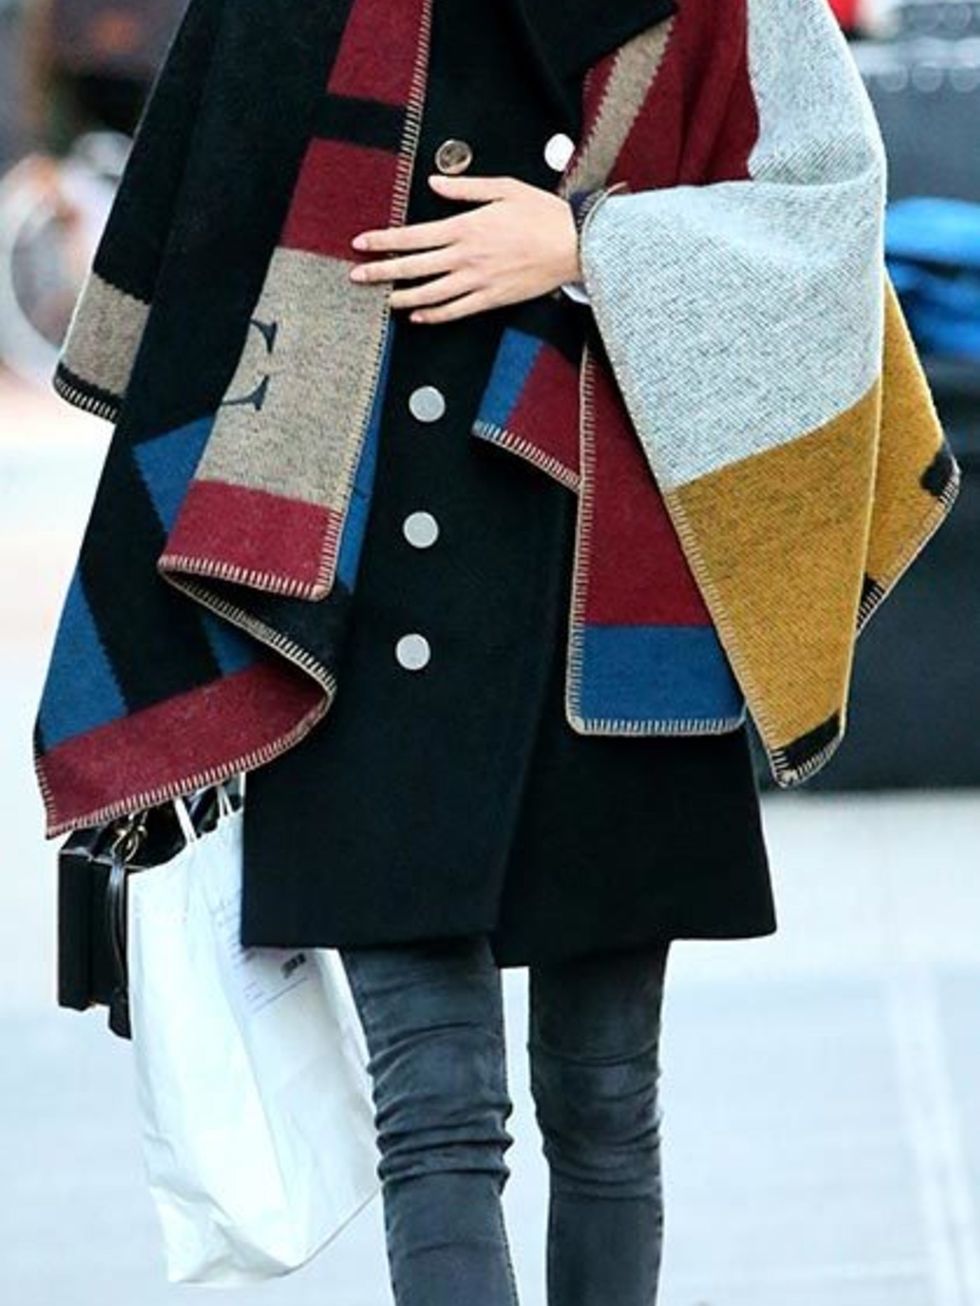 <p><a href="http://www.elleuk.com/fashion/celebrity-style/alexa-chung-s-style-file">Alexa Chung</a> wears the Burberry poncho while out and about in New York, November 2014.</p>